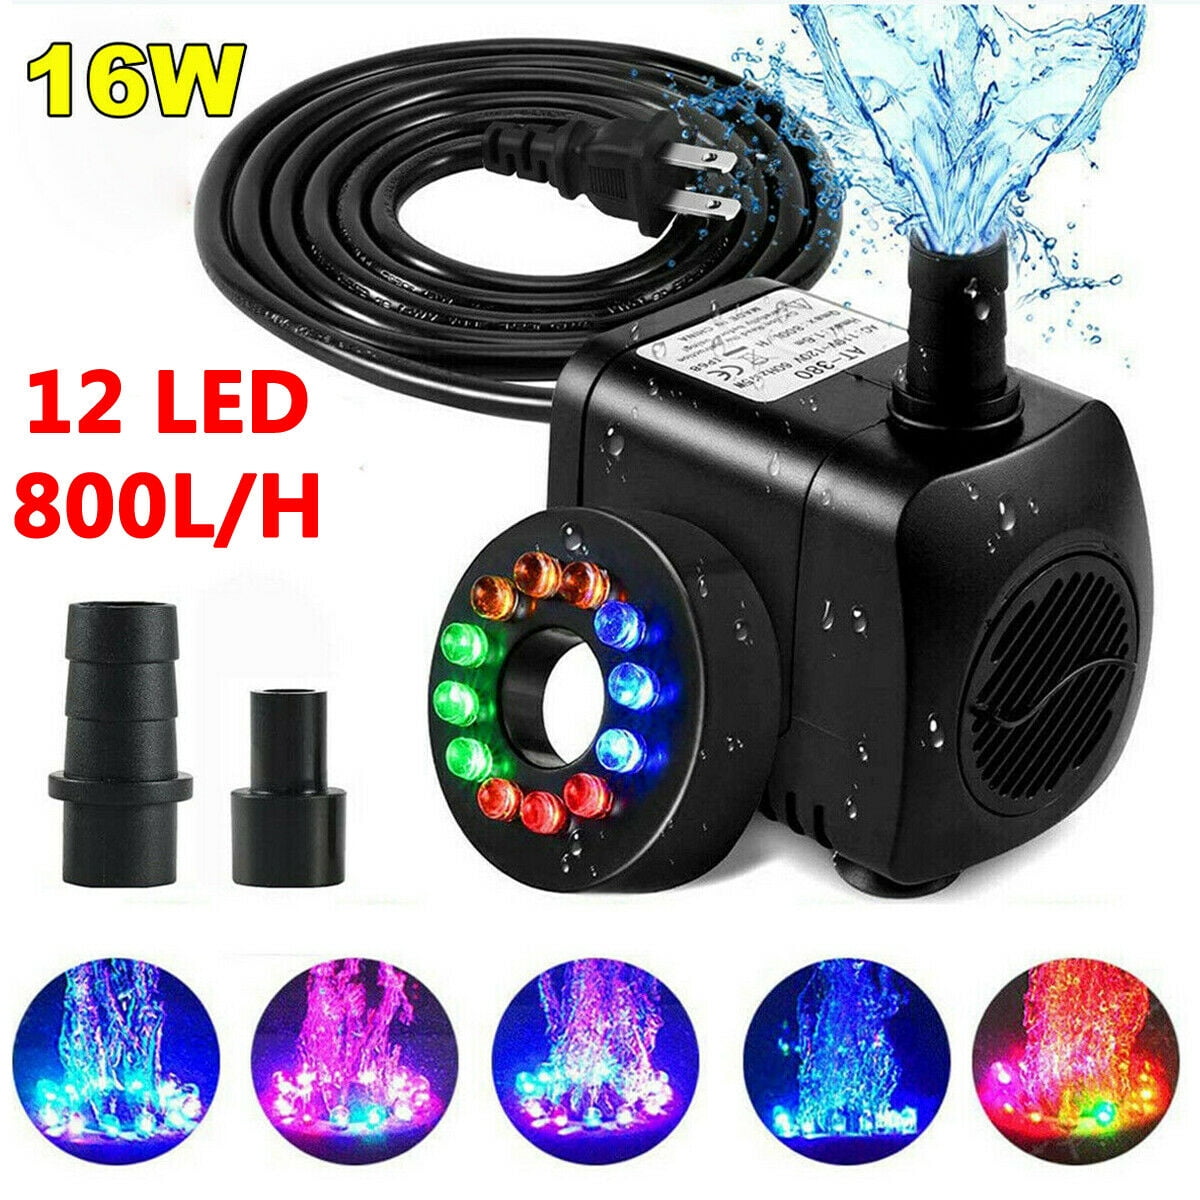 Water Pump with 12 Colorful LED Light for Fountain Fish Tank Aquarium 5W 350L/H 